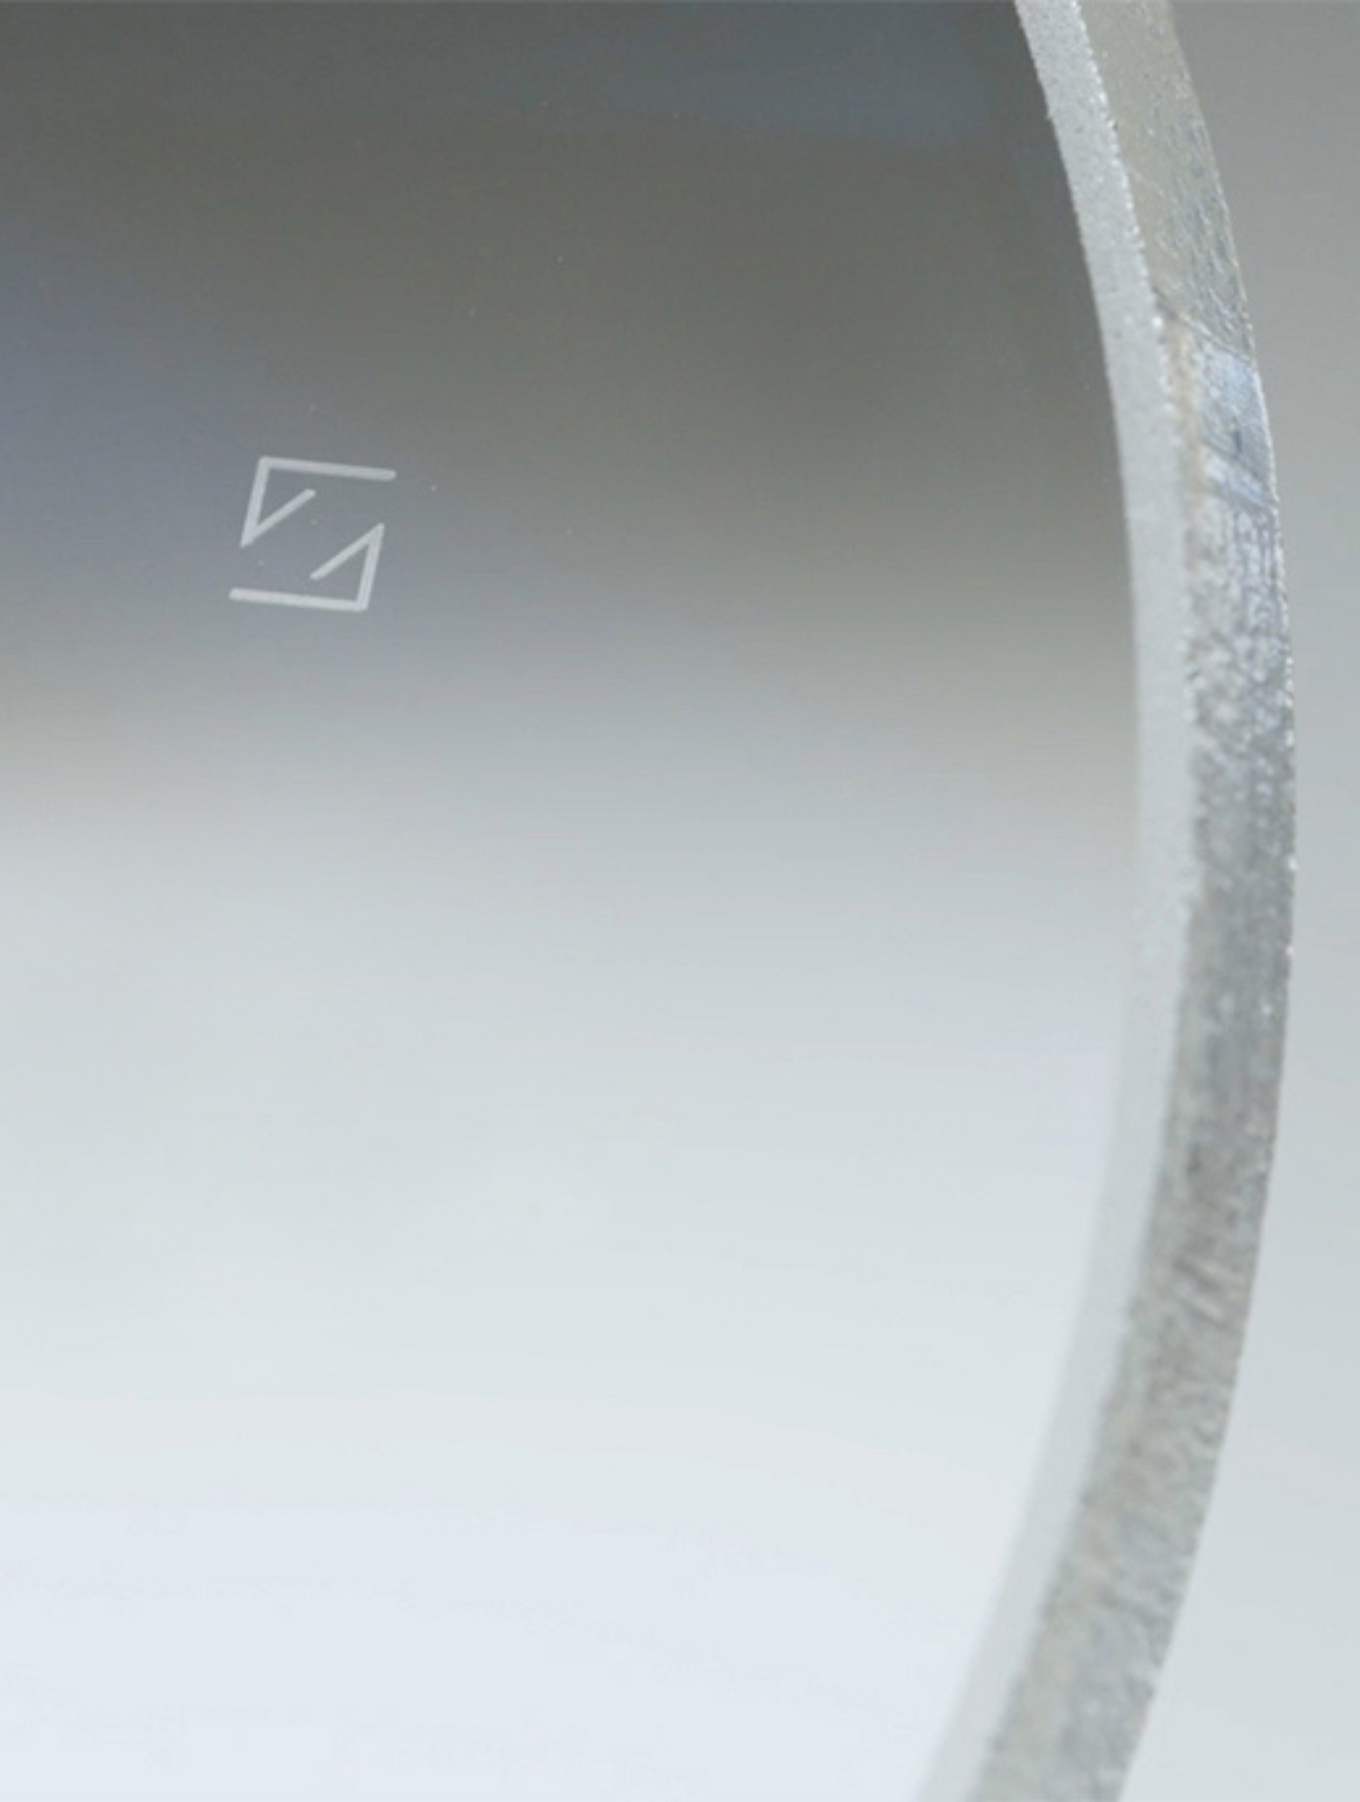 A guide to our new ZEISS lenses